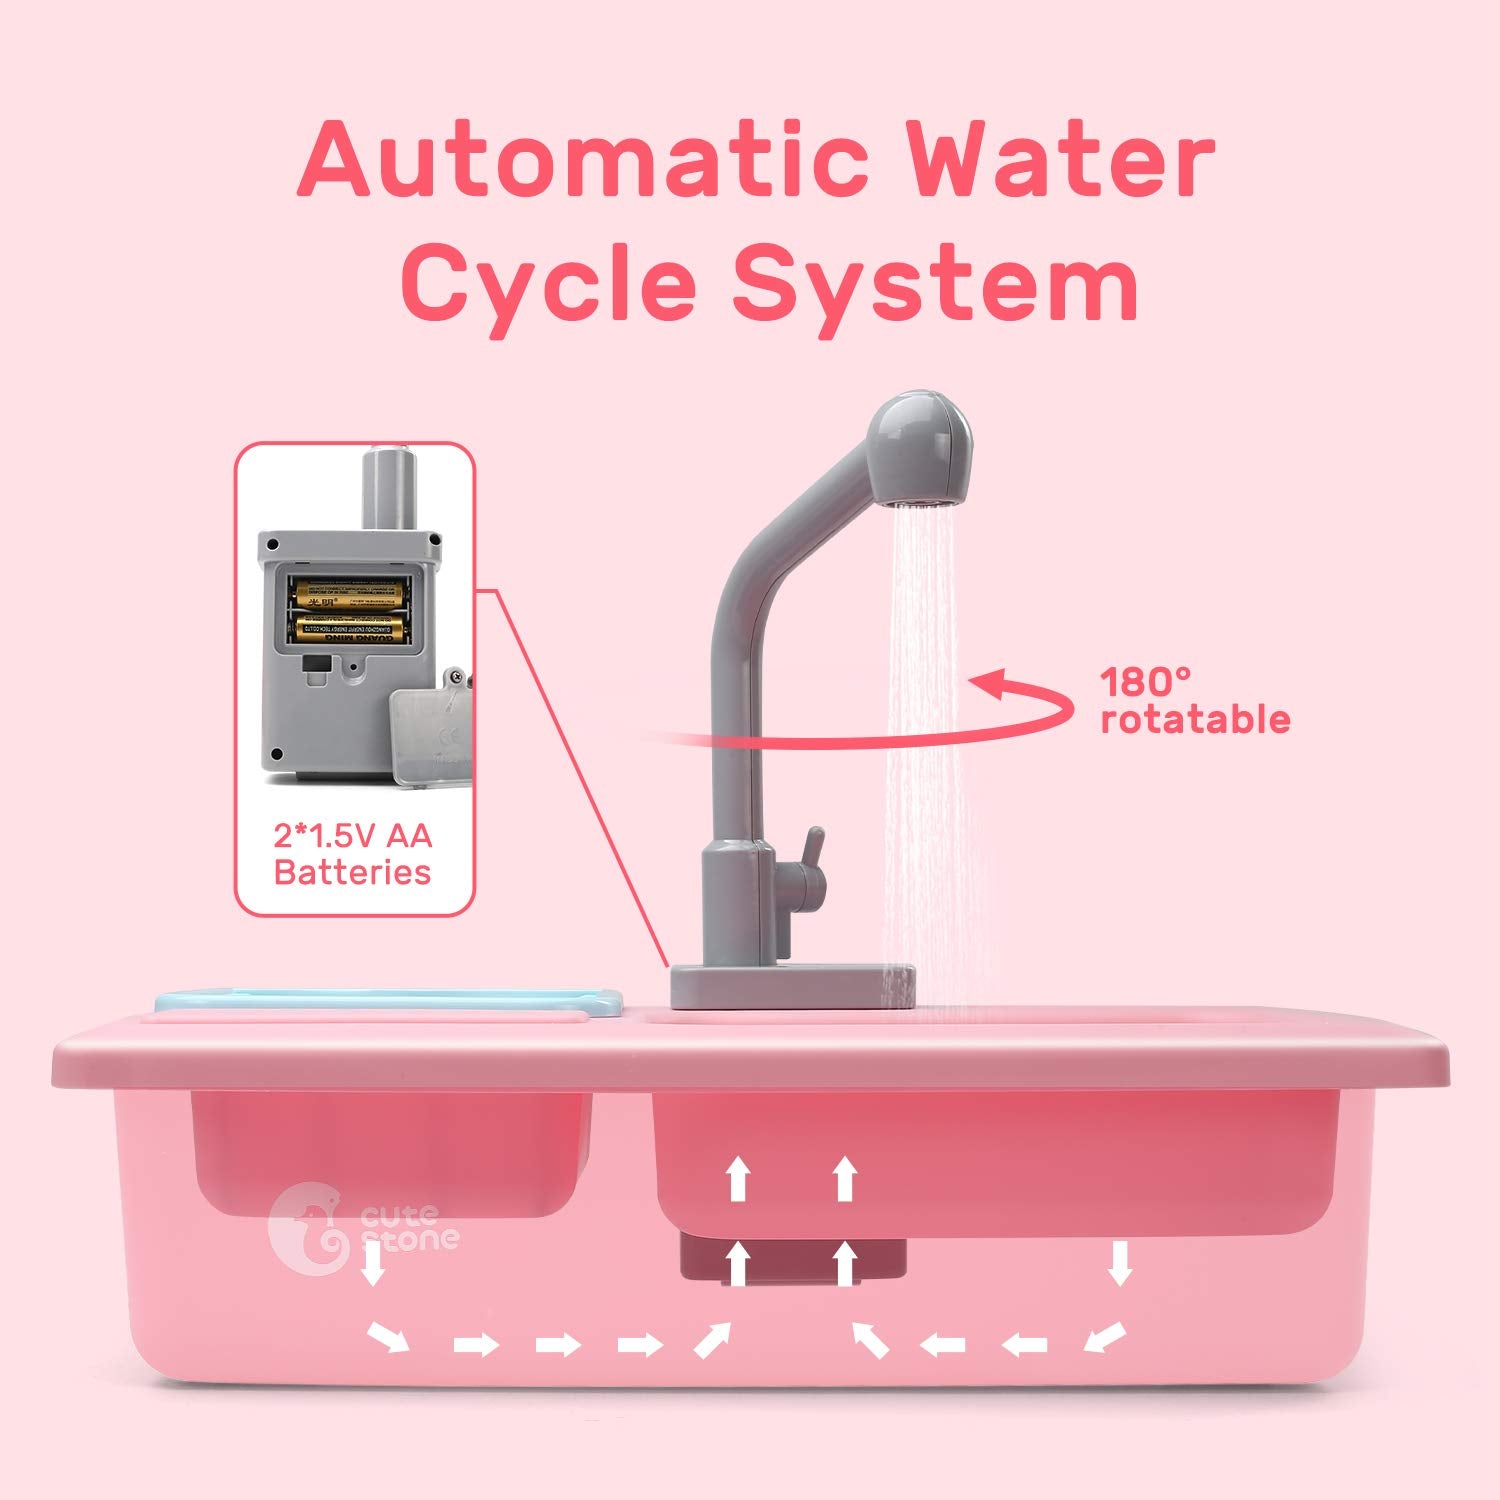 CUTE STONE Play Kitchen Sink Toys,Electric Dishwasher Playing Toy with Running Water,Upgraded Automatic Faucets and Color Changing Accessories, Role Play Sink Set Gifts for Kids Boys Girls Toddlers